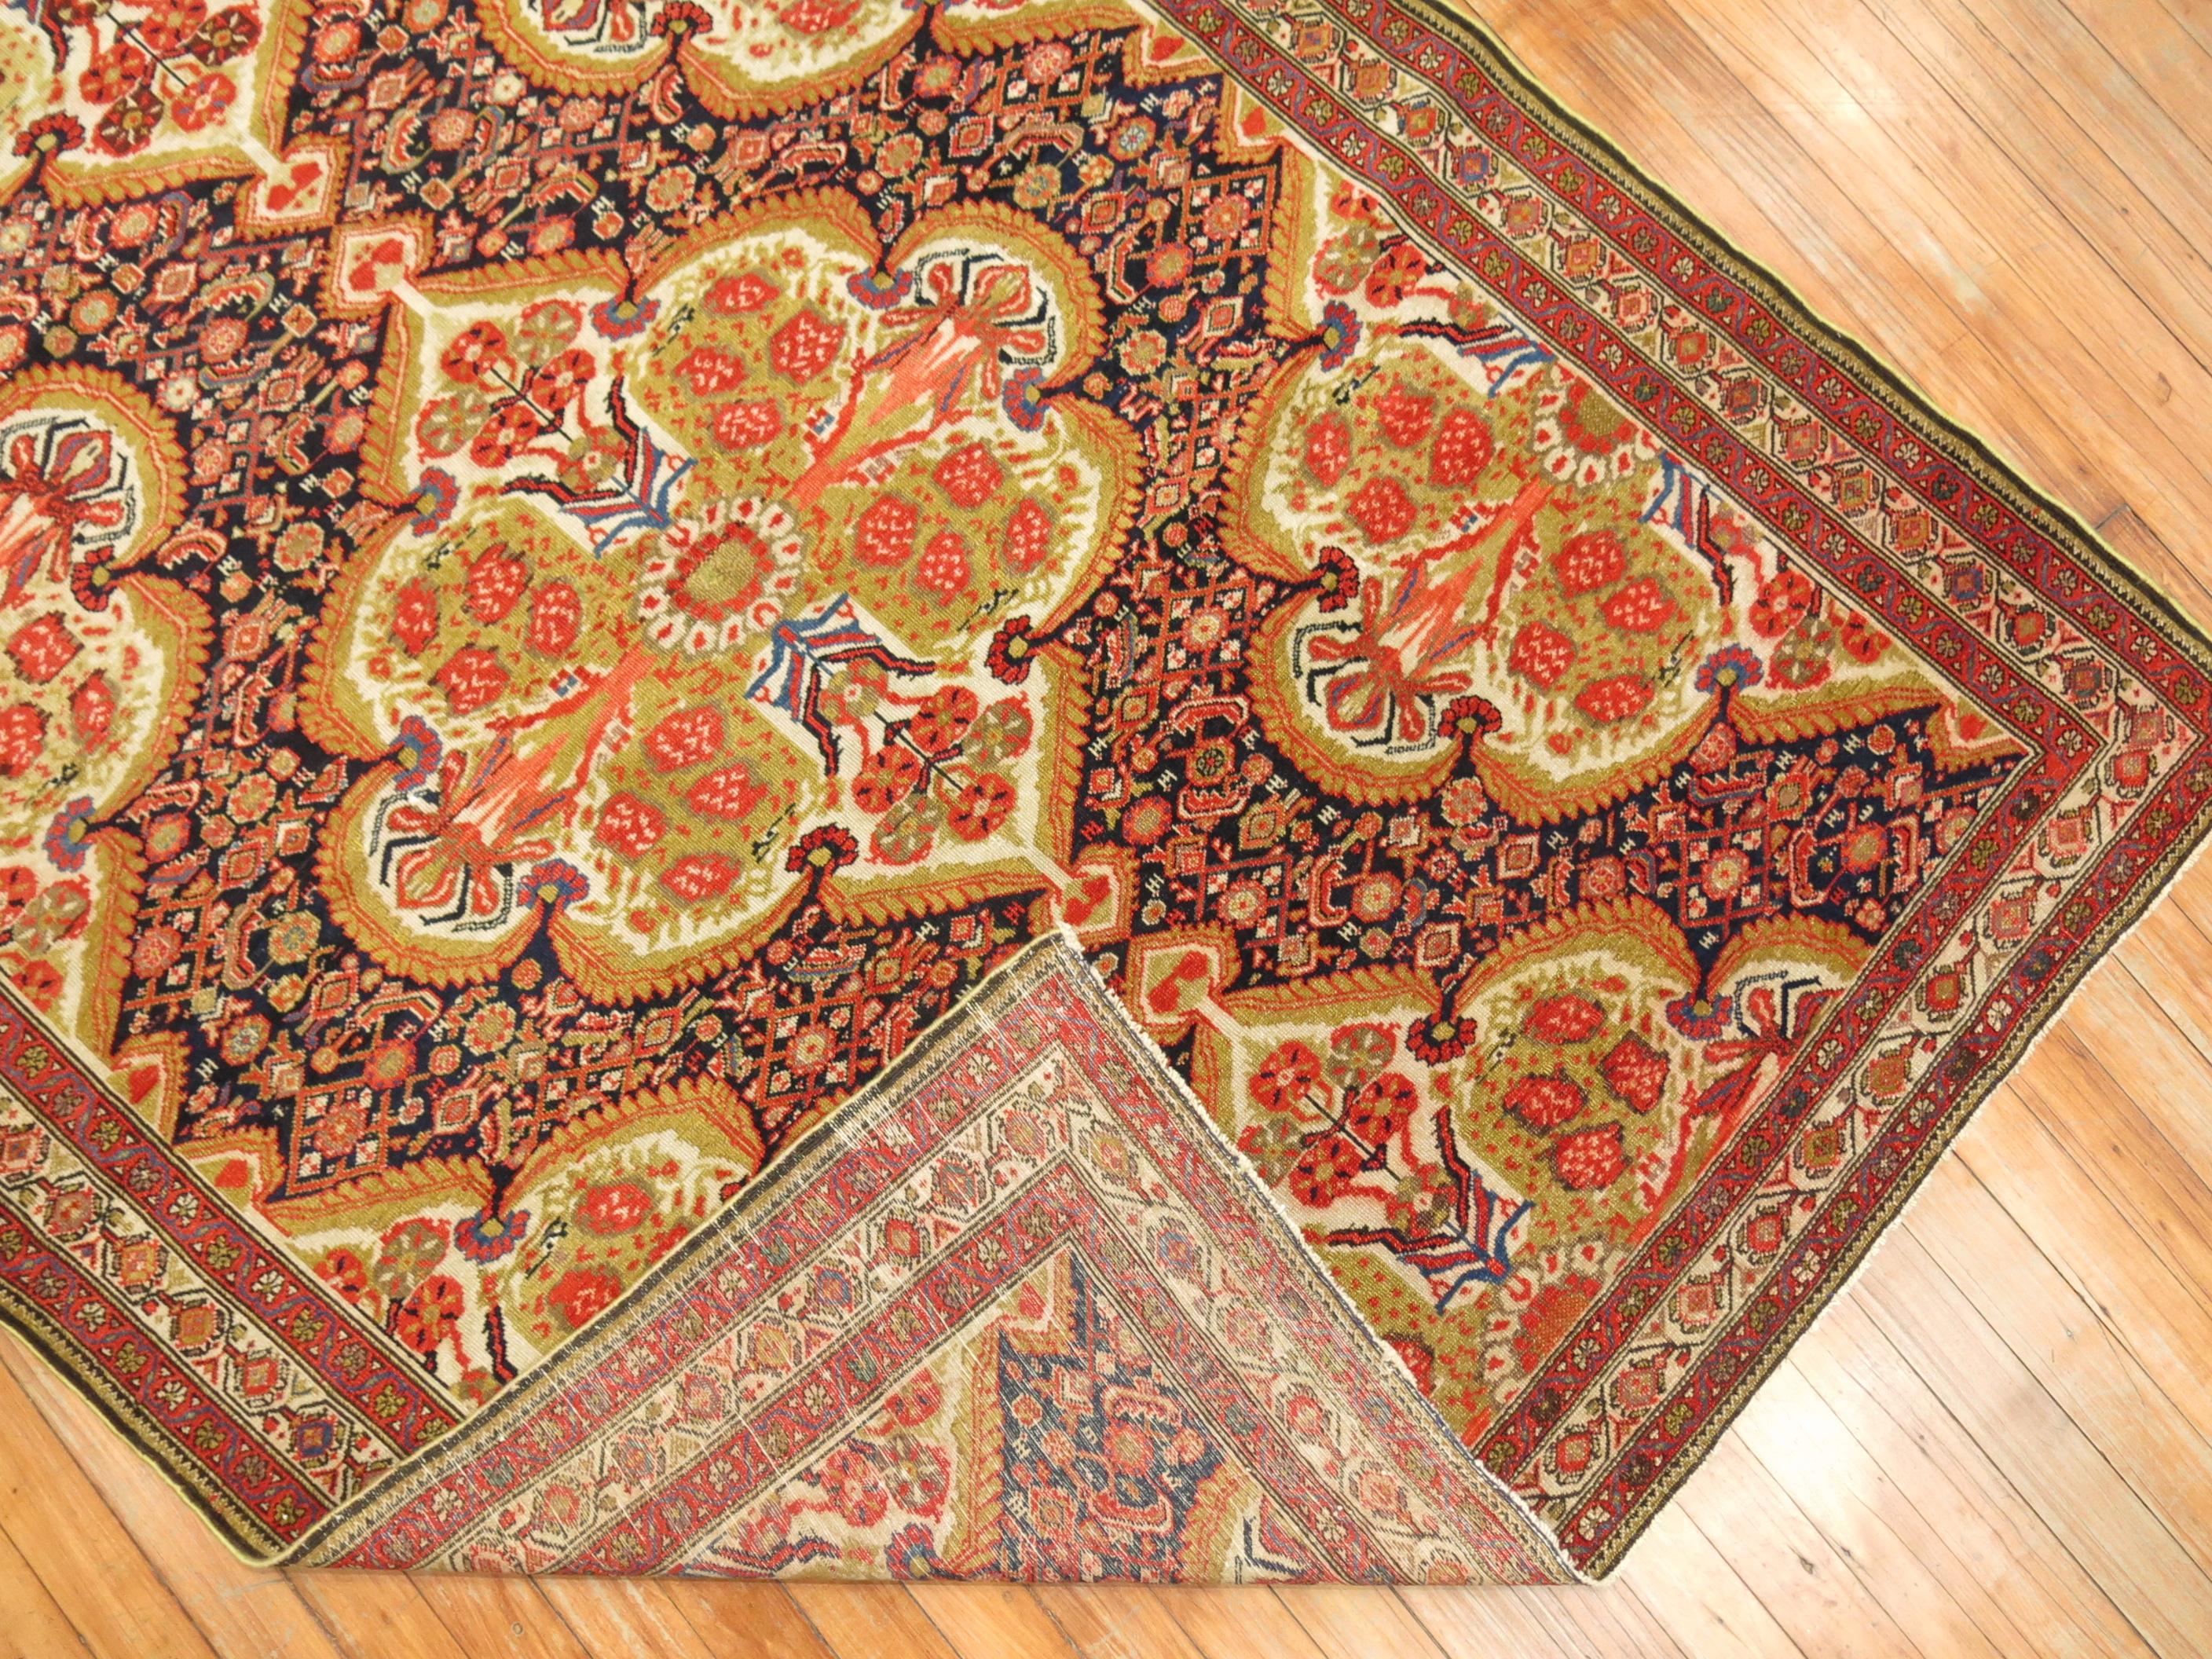 A colorful formal fine quality connoisseur level Persian Malayer rug. Rugs this quality type can be used as great wall decor as well.

Measures: 4'4'' x 5'8''.